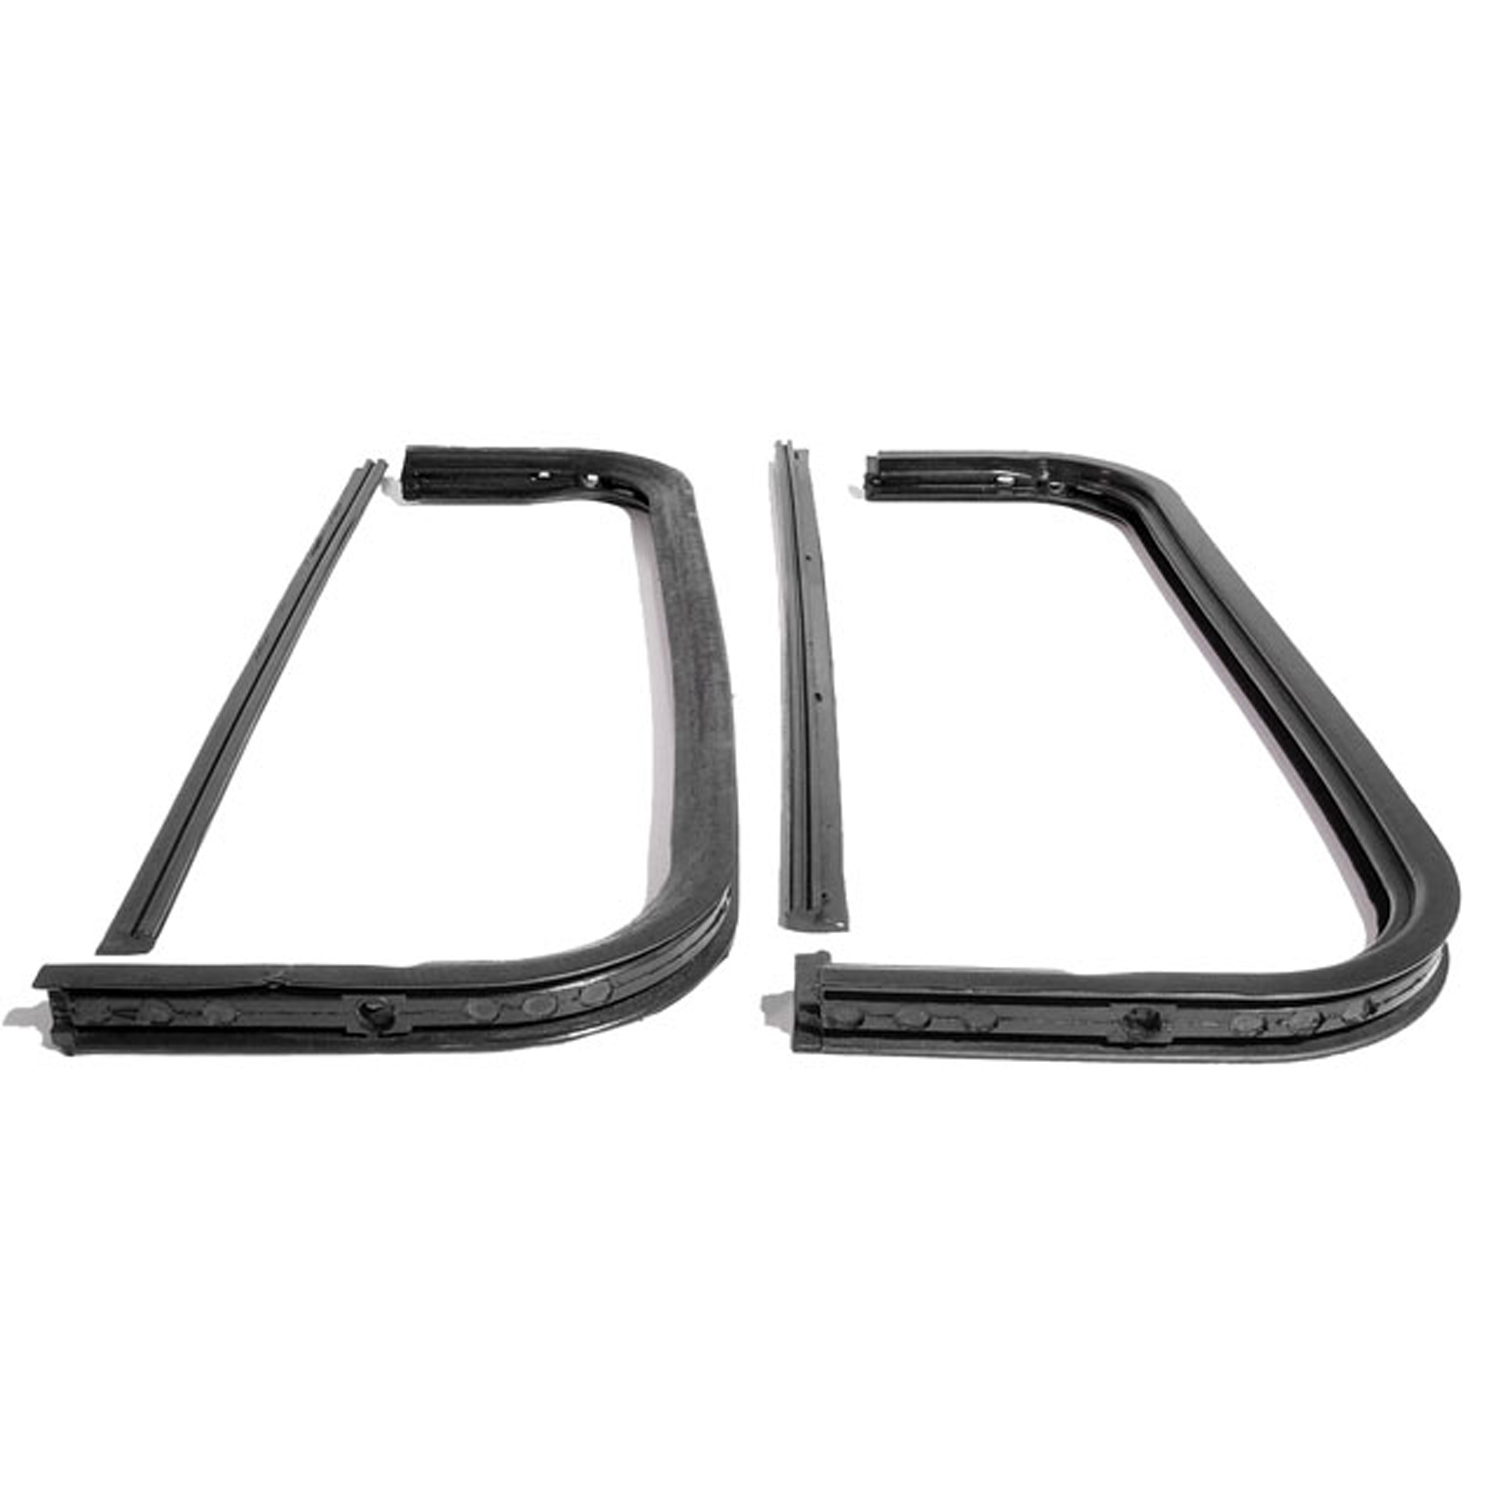 1961 Chevrolet C30 Pickup Vent Window Seals with Division Post Seals-WR 1900